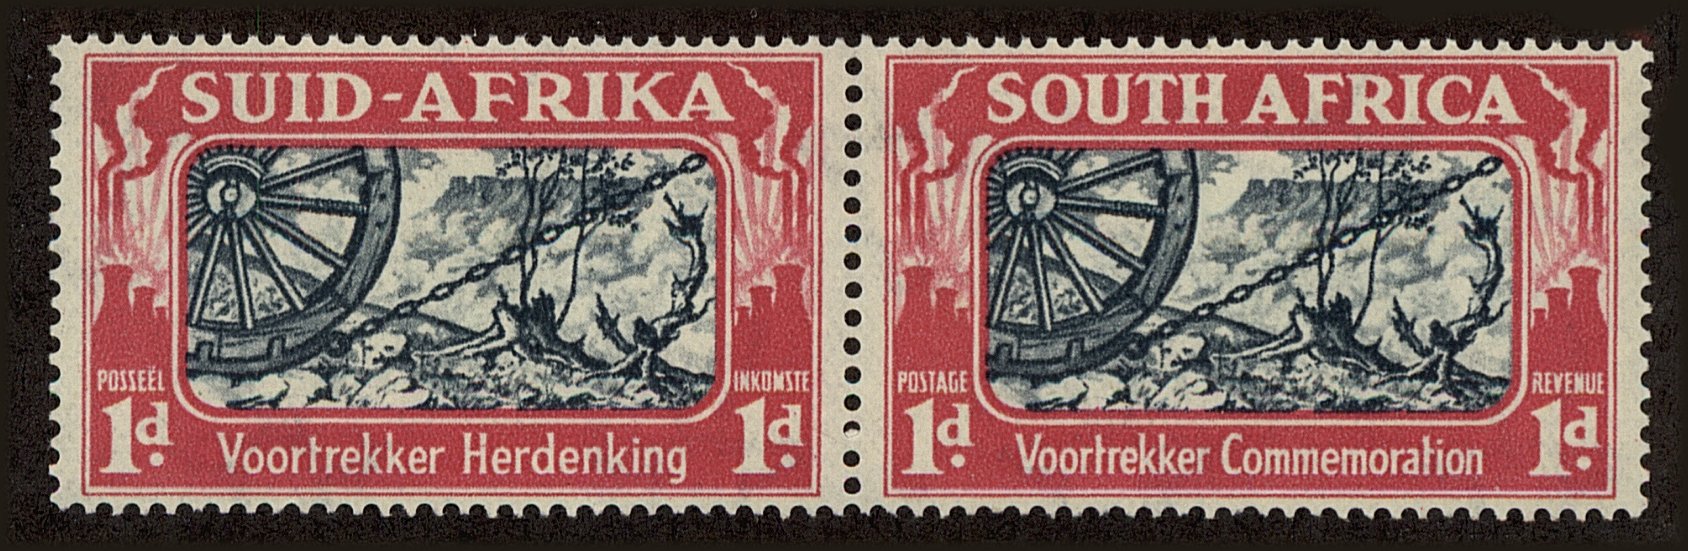 Front view of South Africa 79 collectors stamp